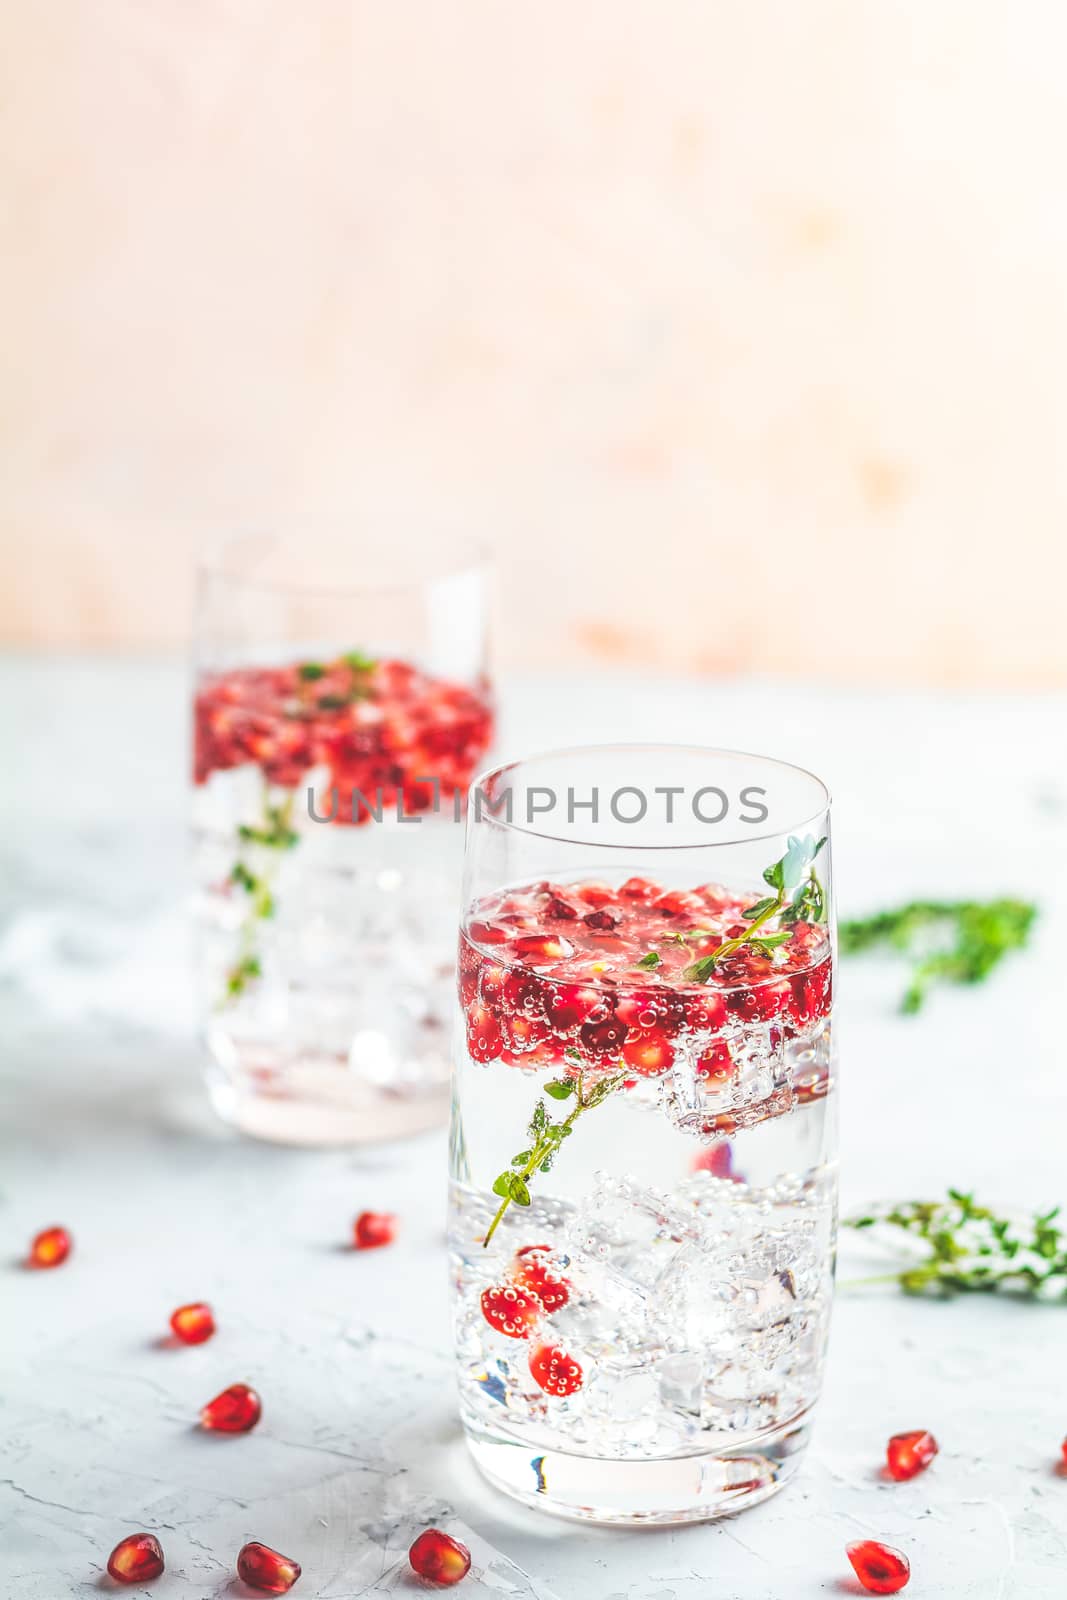 Festive drinks, gin and tonic pomegranate cocktail or detox wate by ArtSvitlyna